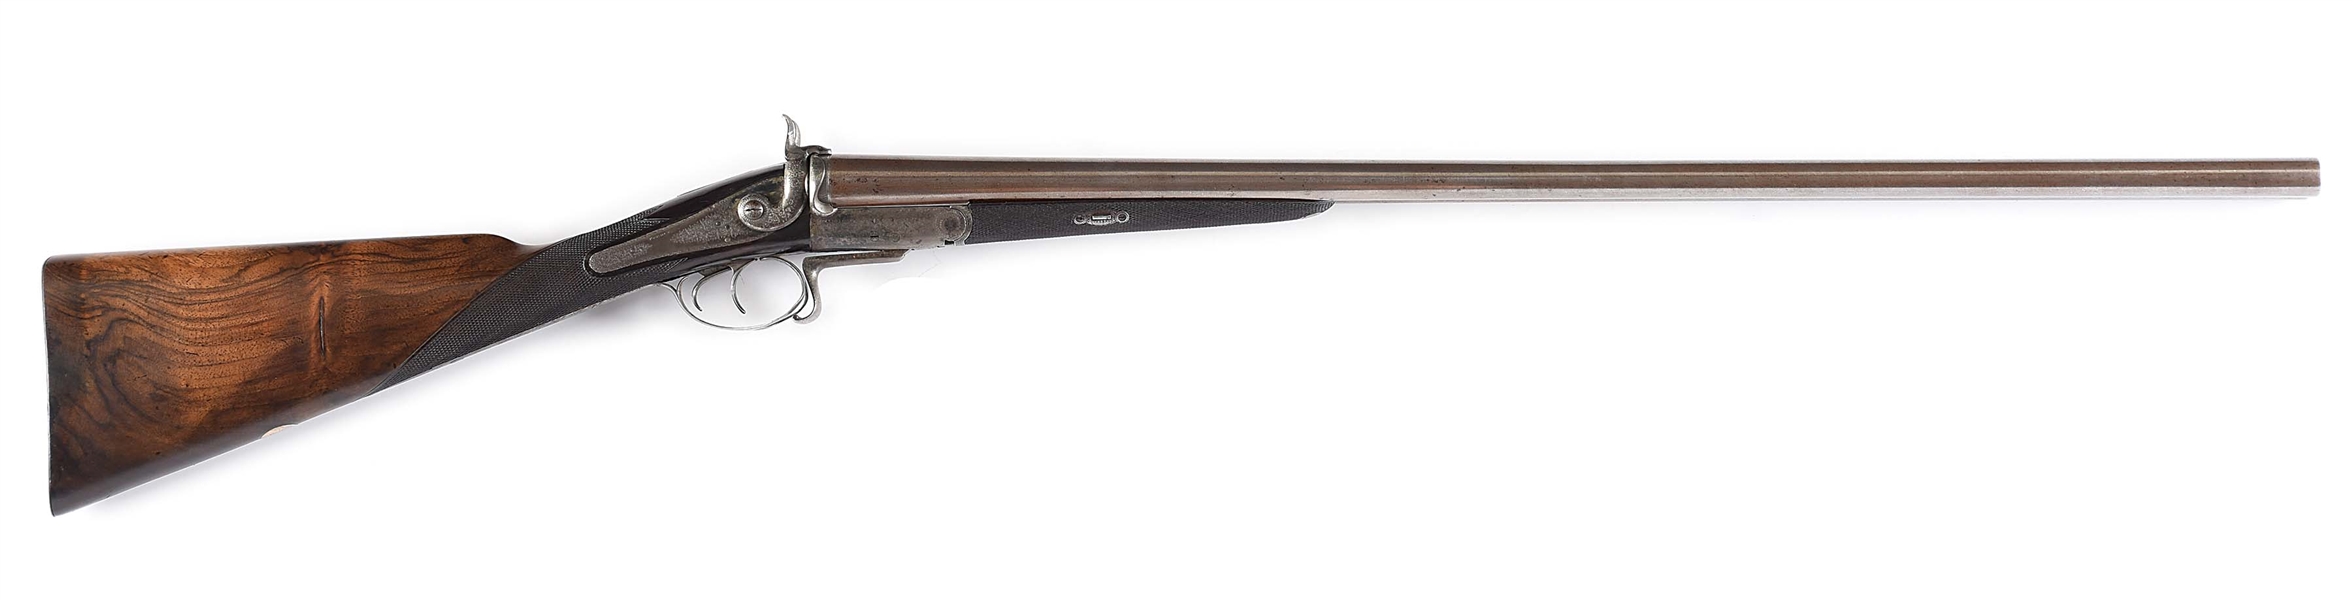 (A) JAMES PURDEY FIRST MODEL THUMBHOLE LEVER GAME GUN INCORPORATING PURDEYS PATENT 424 OF 1865.